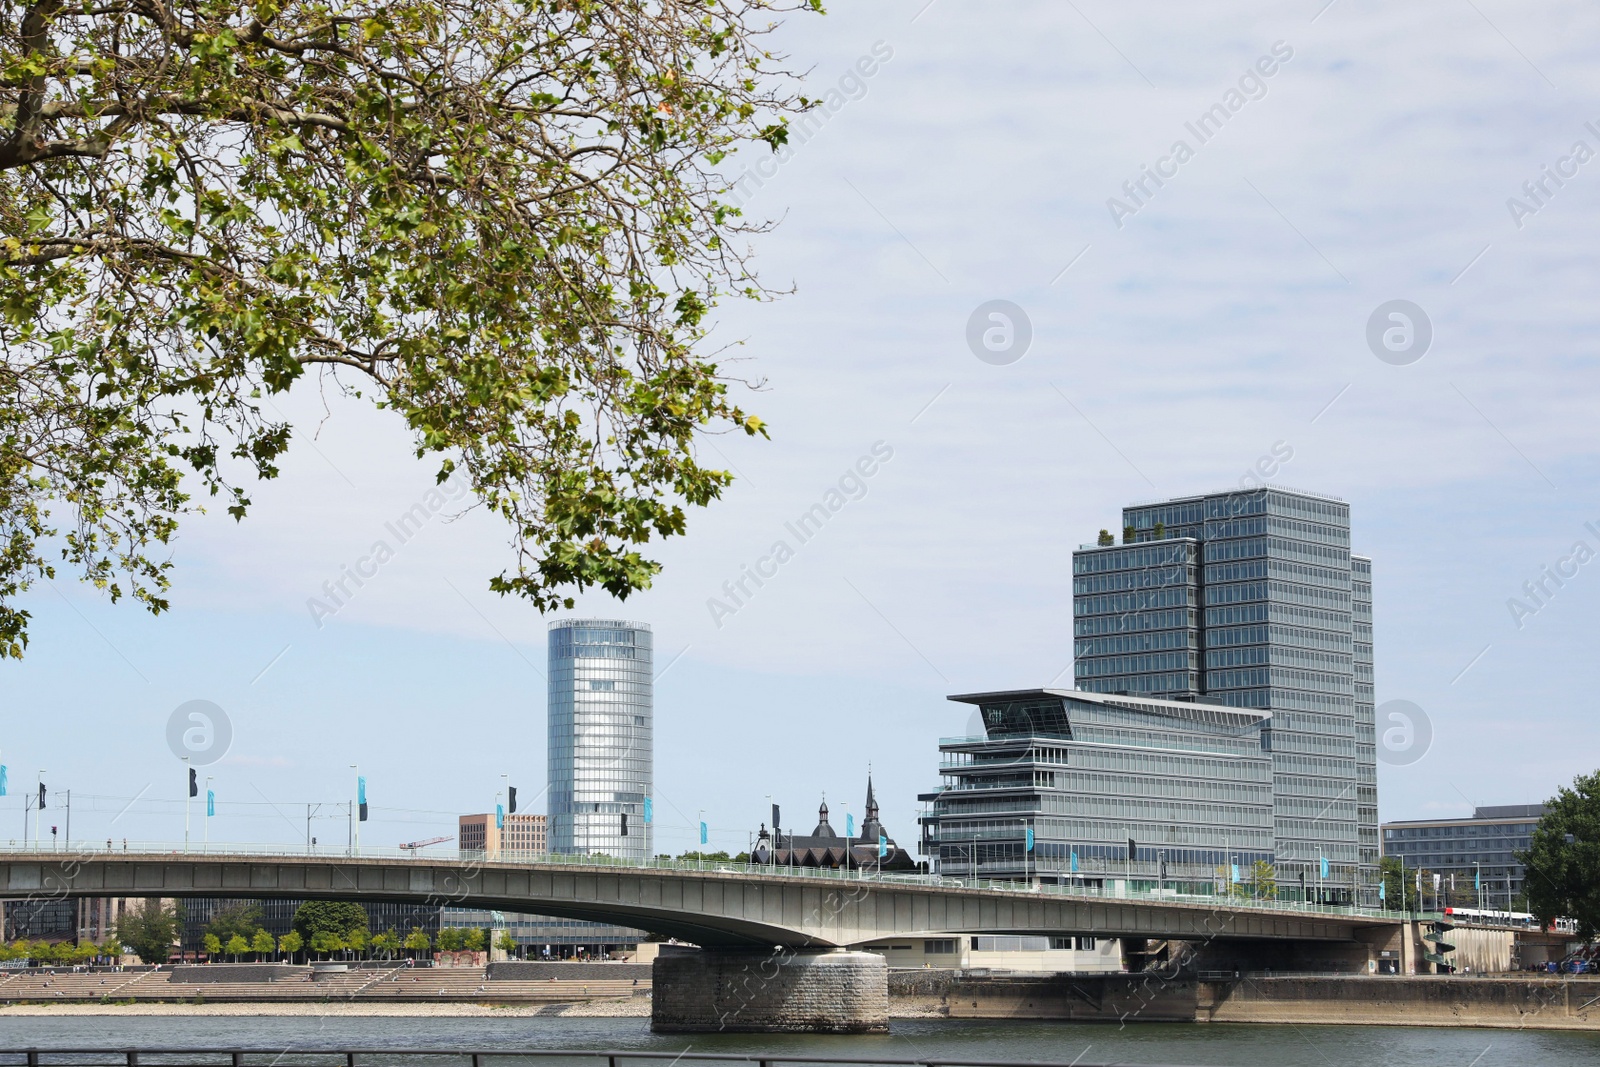 Photo of Picturesque view of modern city architecture and bridge over river